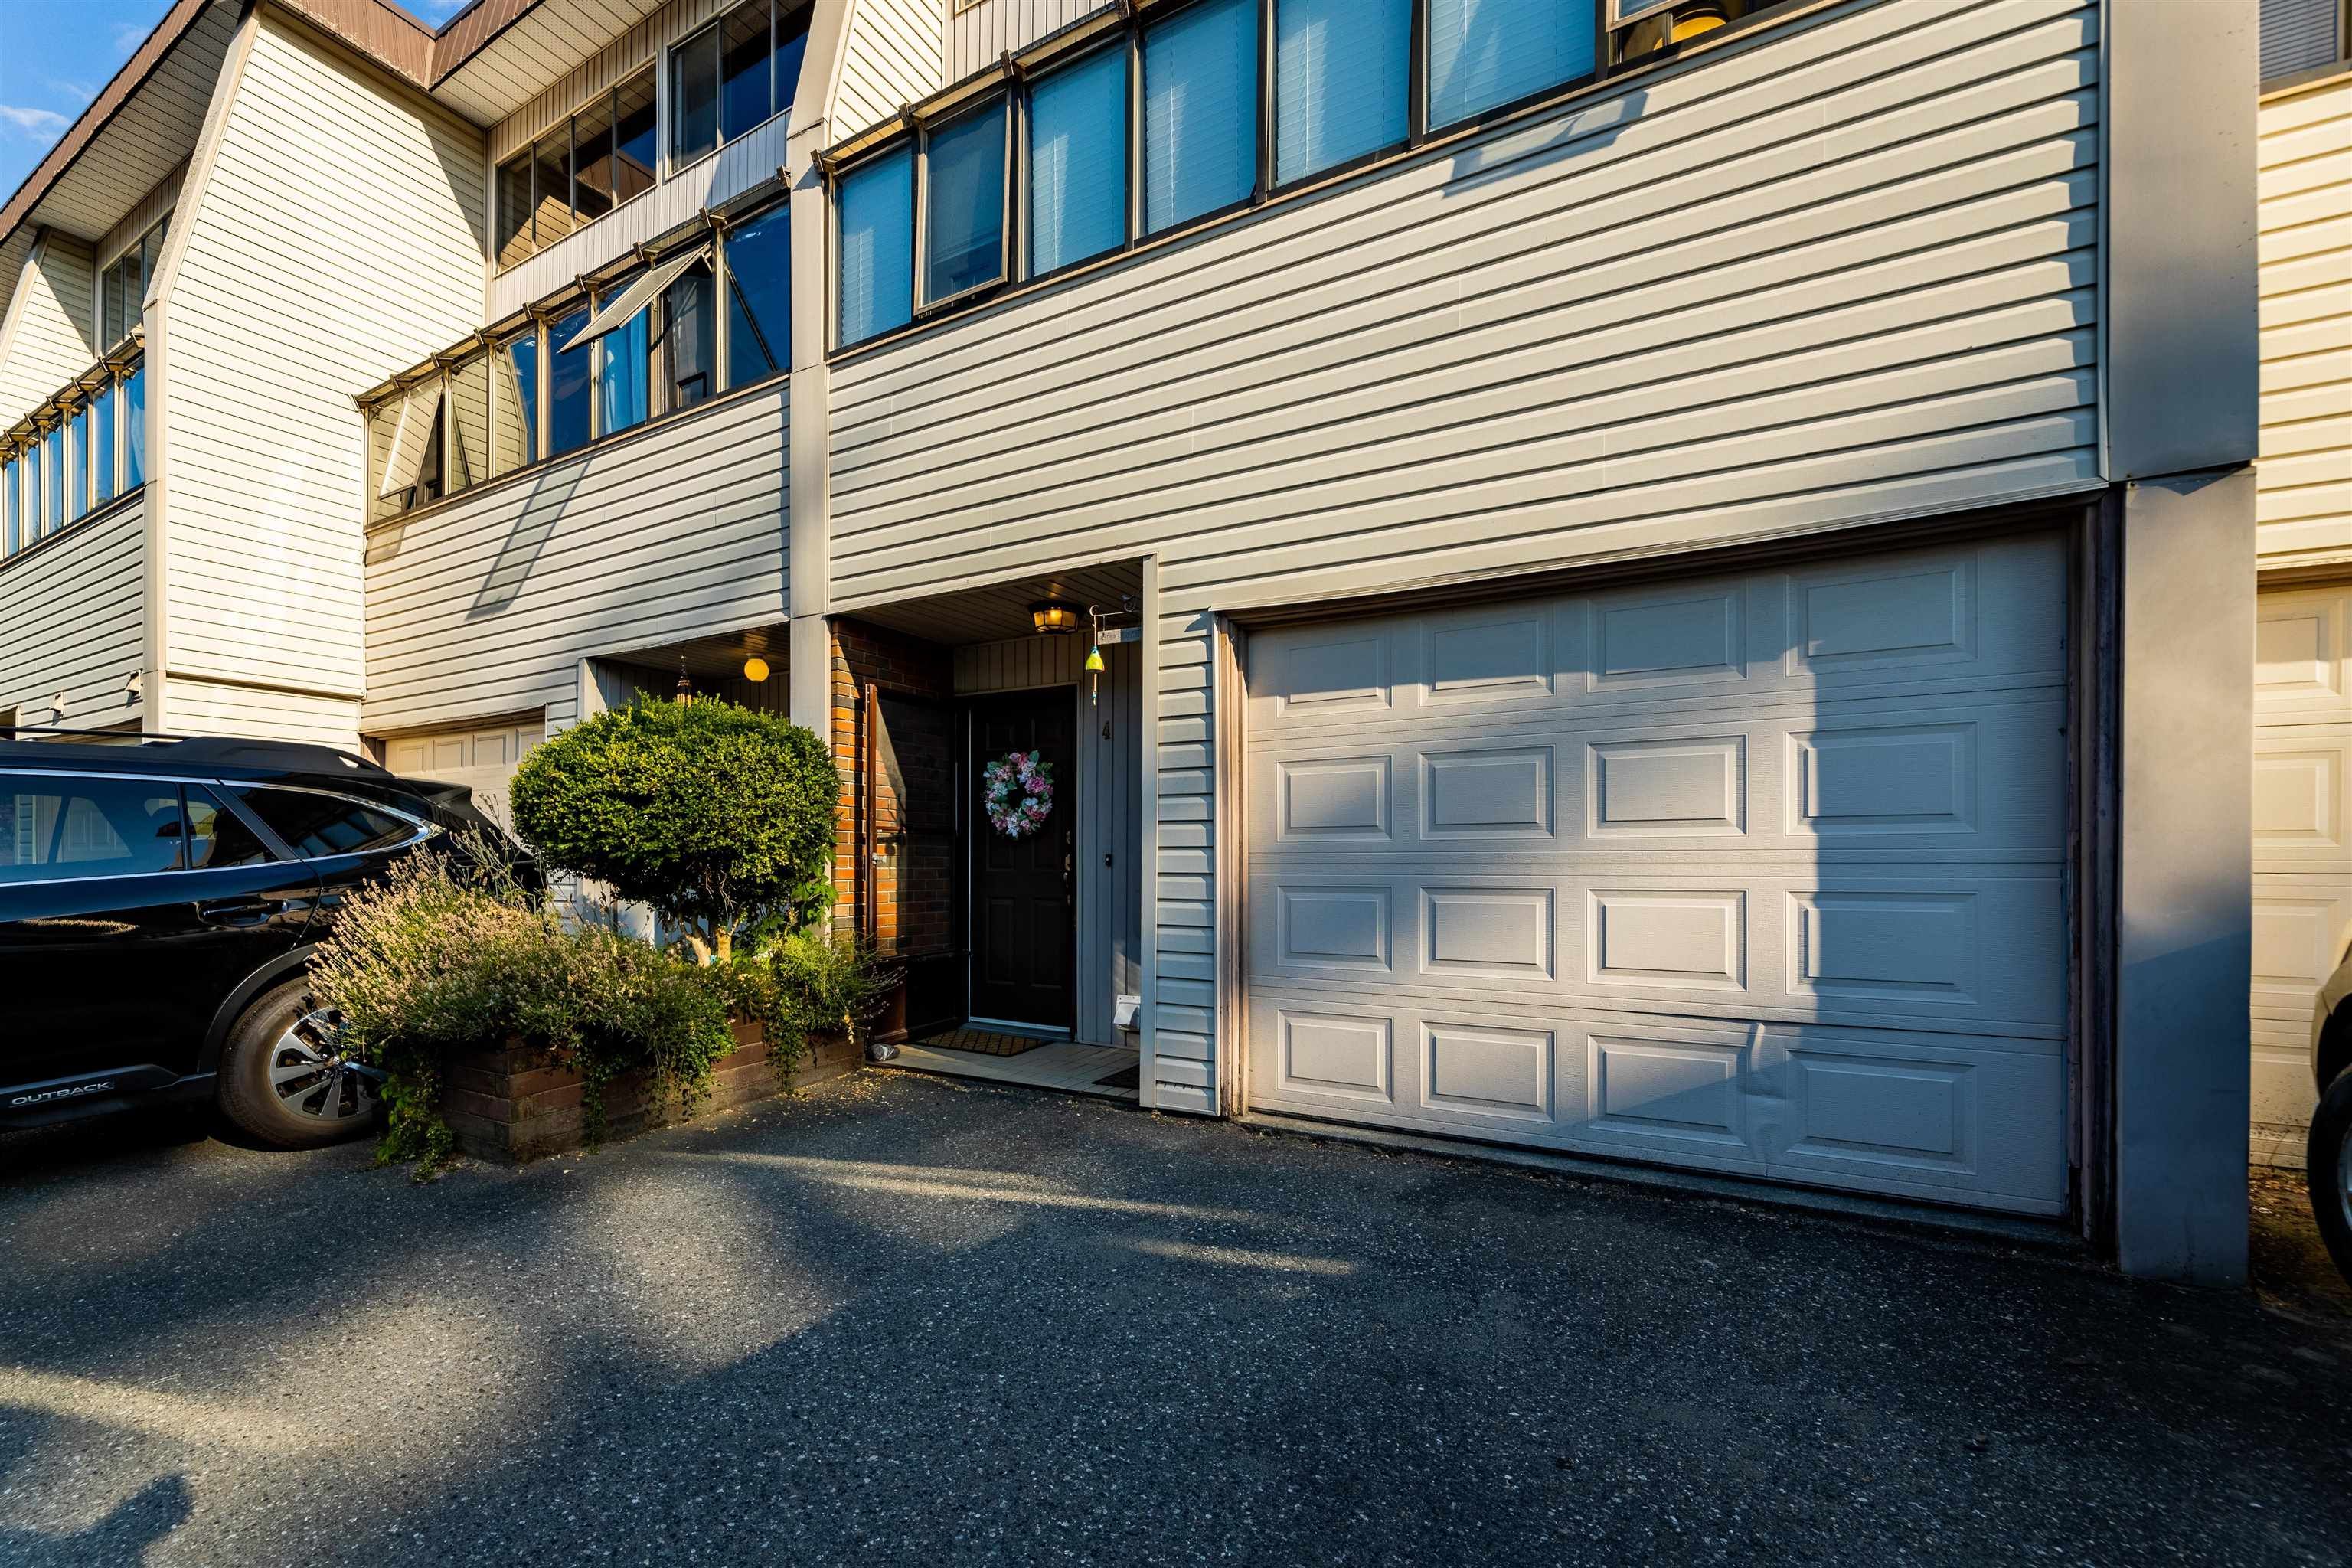 New property listed in Chilliwack Proper East, Chilliwack